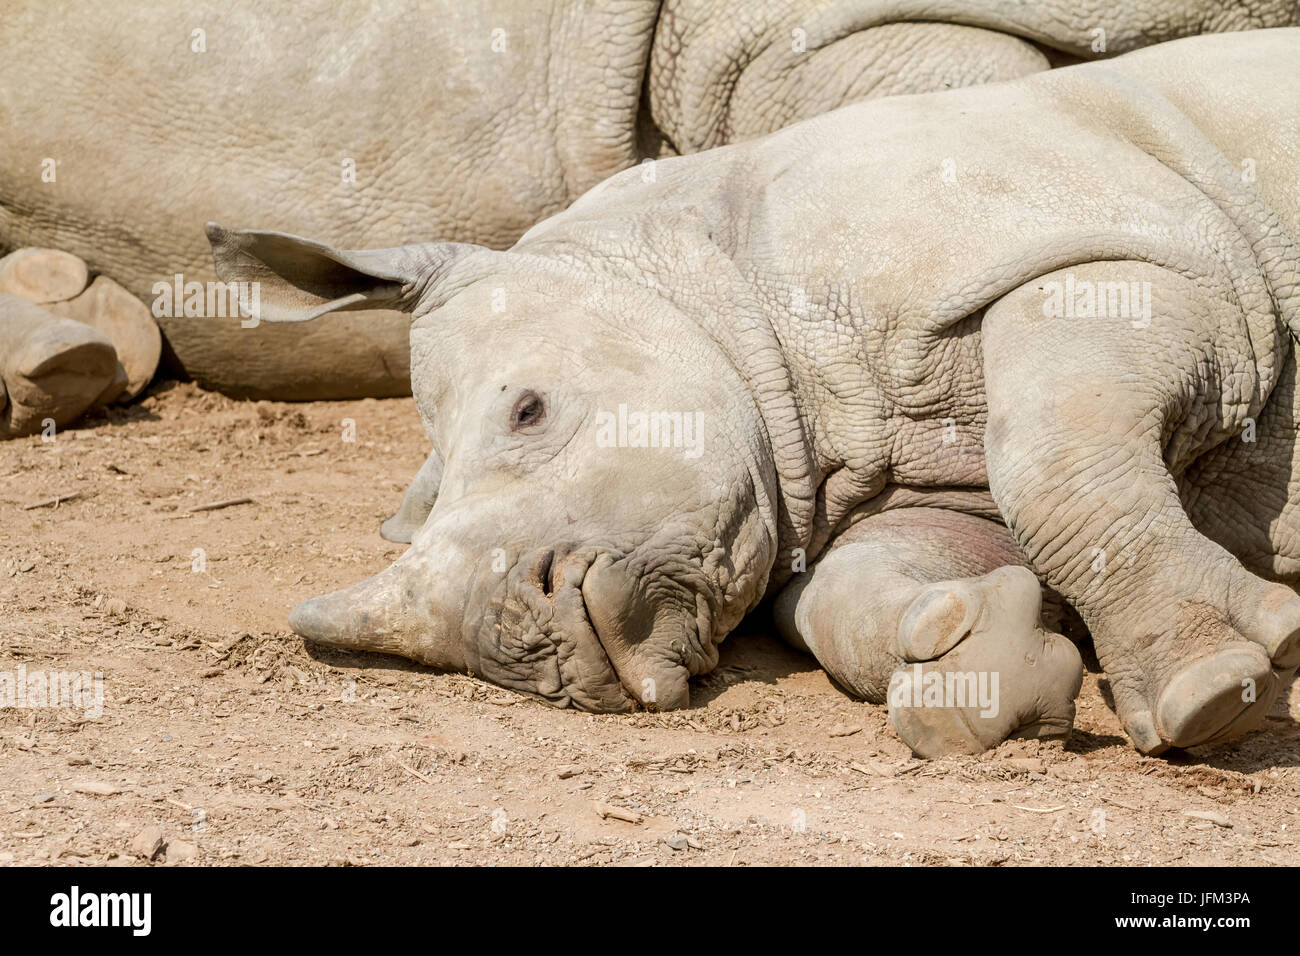 An young rhinoceros lies at his mother's rhinoceros Stock Photo